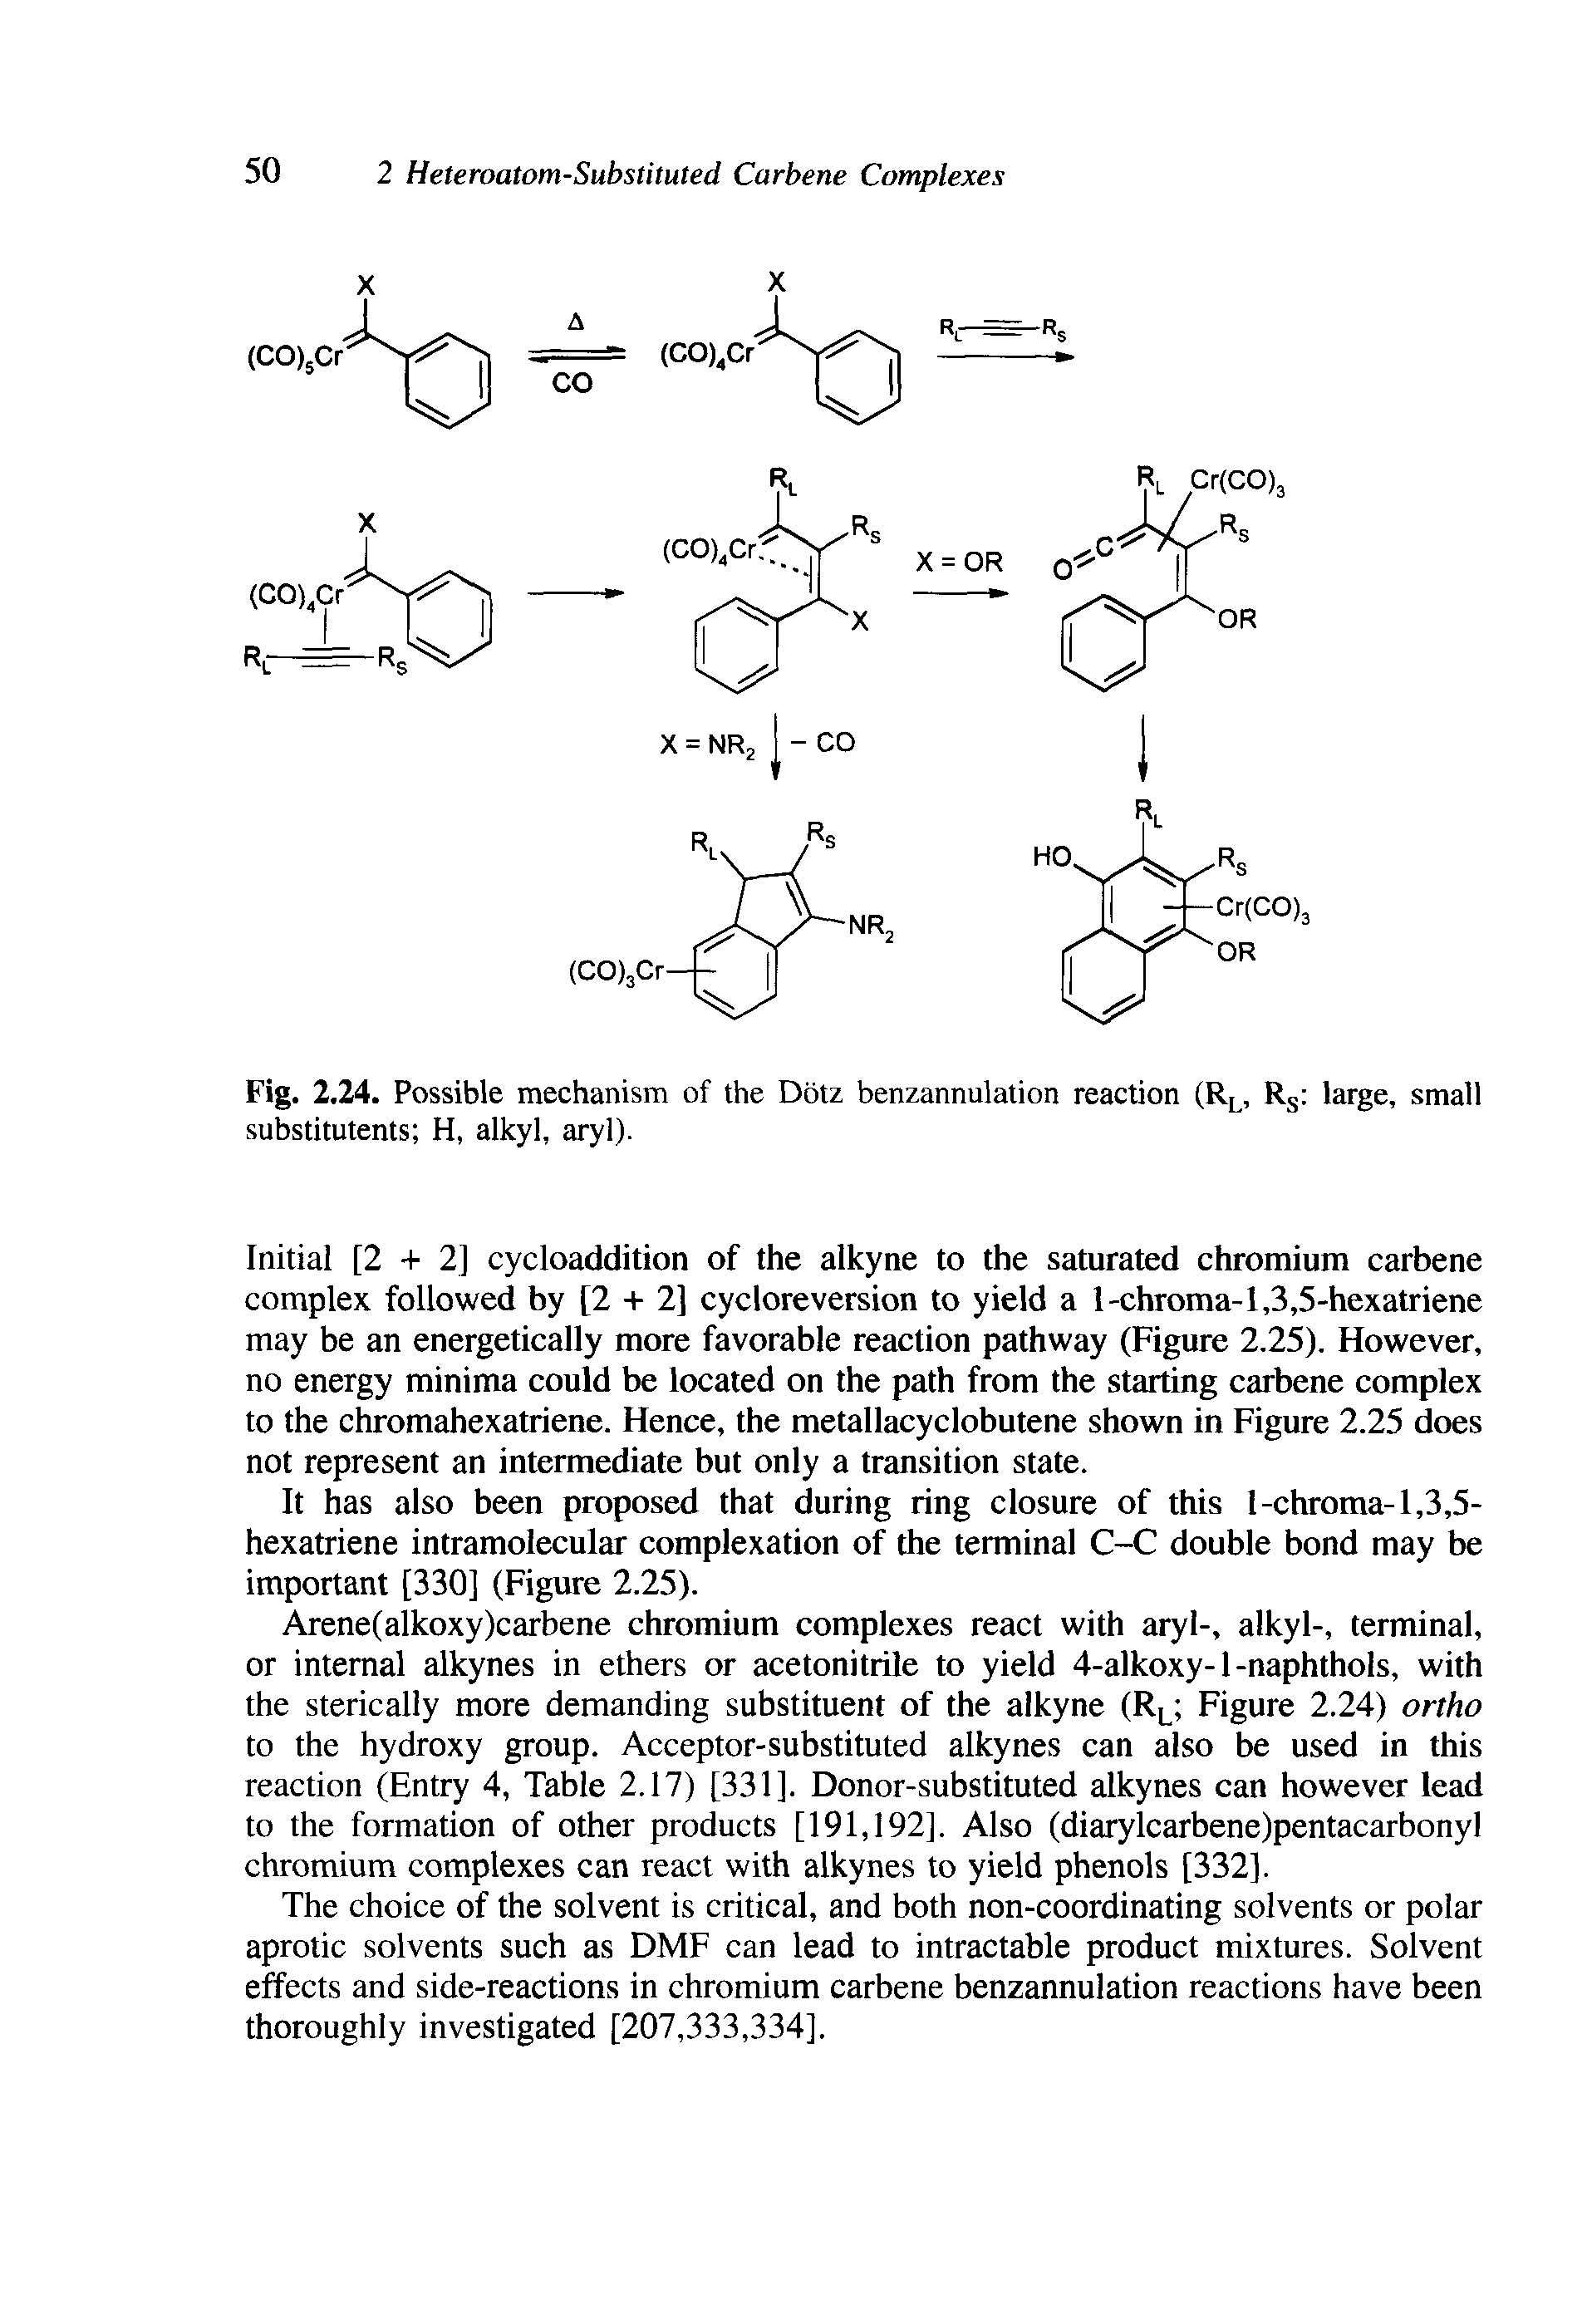 Fig. 2.24. Possible mechanism of the Dotz benzannulation reaction (R, R large, small substitutents H, alkyl, aryl).